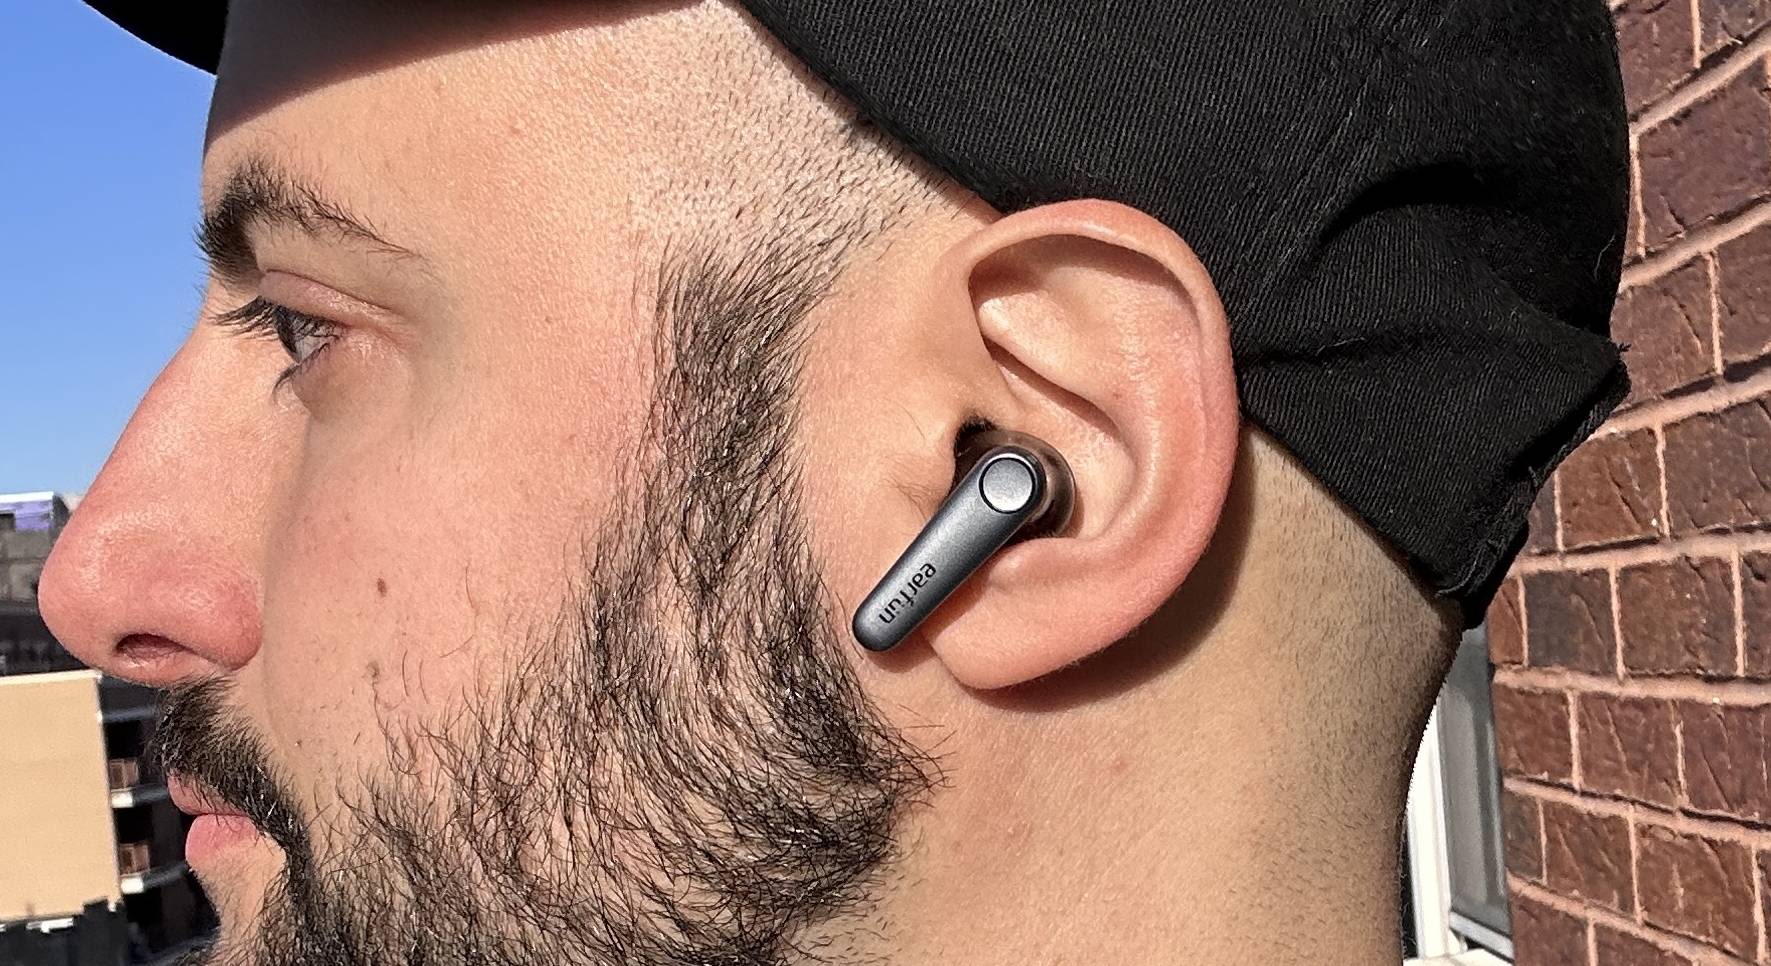 Earfun Air Pro 3 review: a stack of functionality in a very